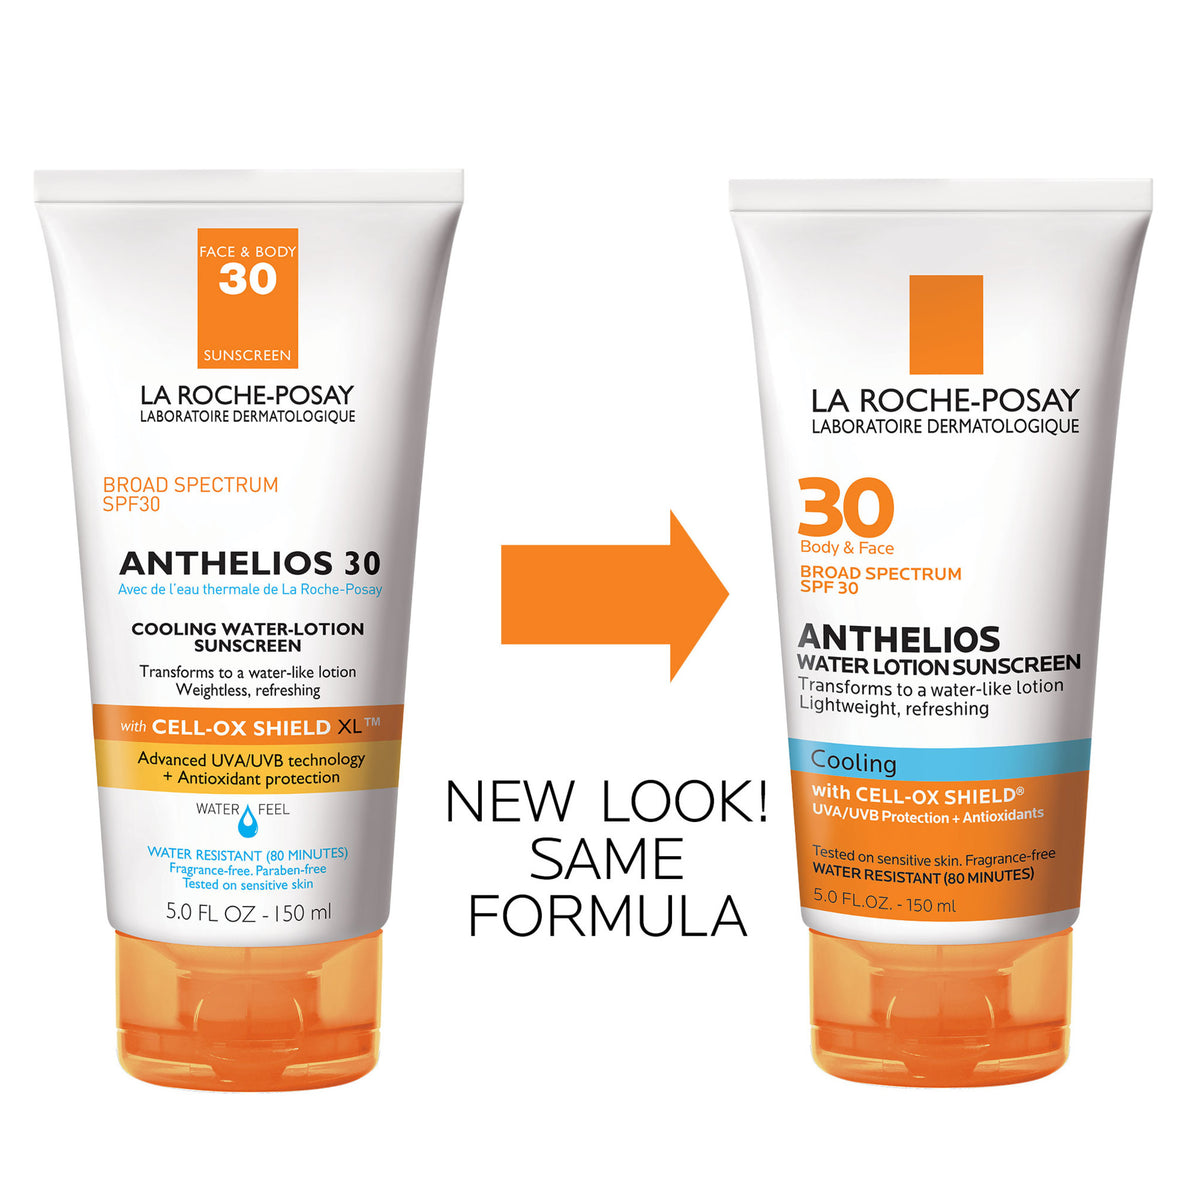 La Roche-Posay Anthelios Cooling Water Lotion Sunscreen SPF 30 .